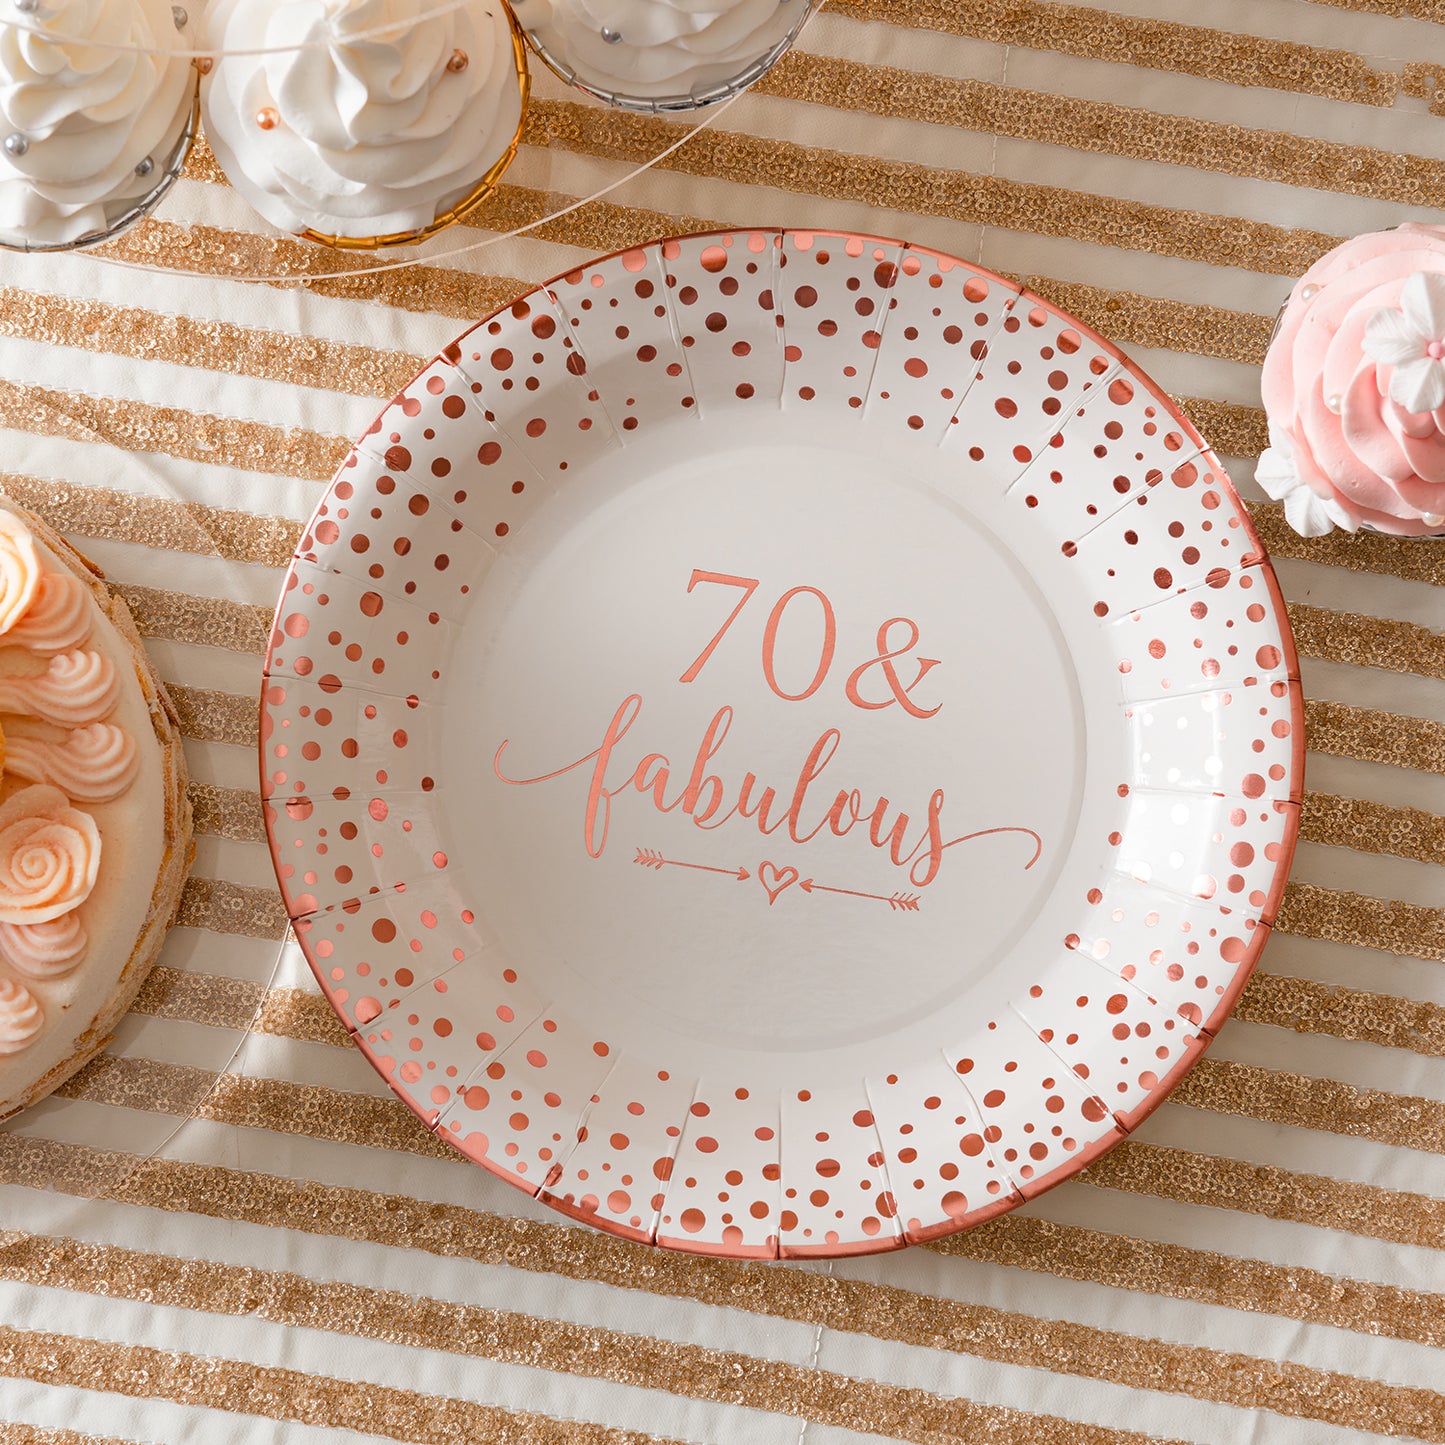 Crisky 70 Fabulous Disposable Plates for Women 70th Birthday Decorations Rose Gold Dessert, Buffet, Cake, Lunch, Dinner Disposable Plates 70th Birthday Party Table Supples, 50 Count, 9 inches